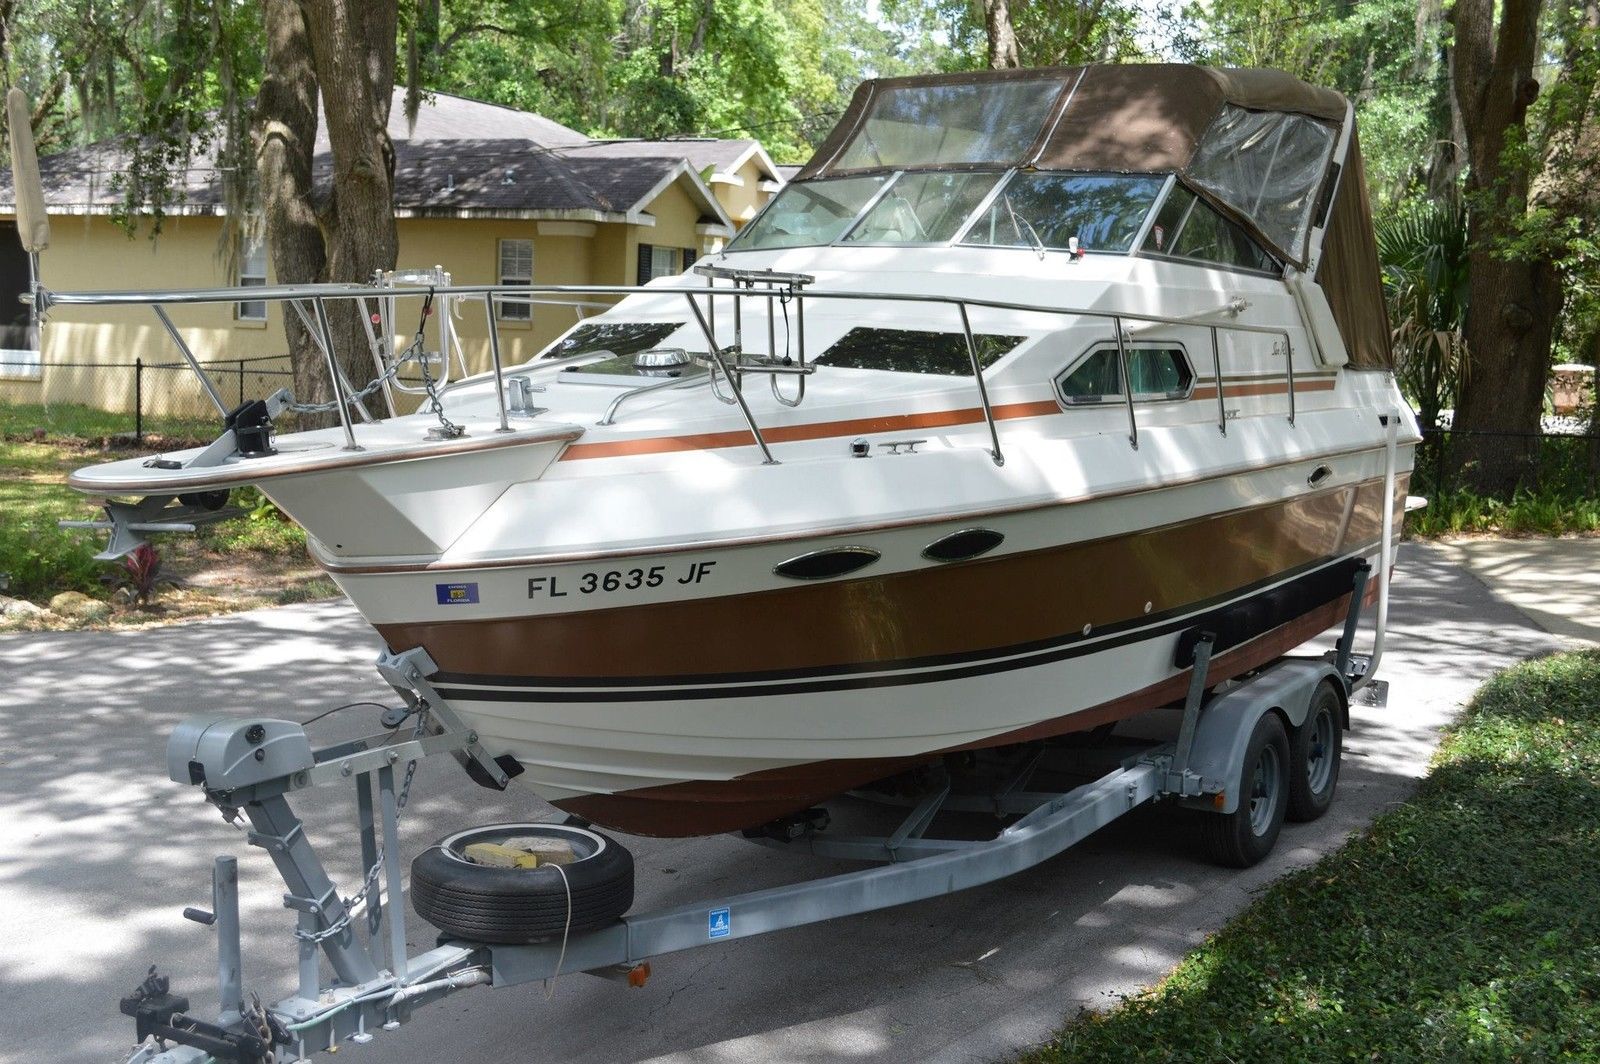 27.5 foot bayliner boat and large trailer, ocean fishing